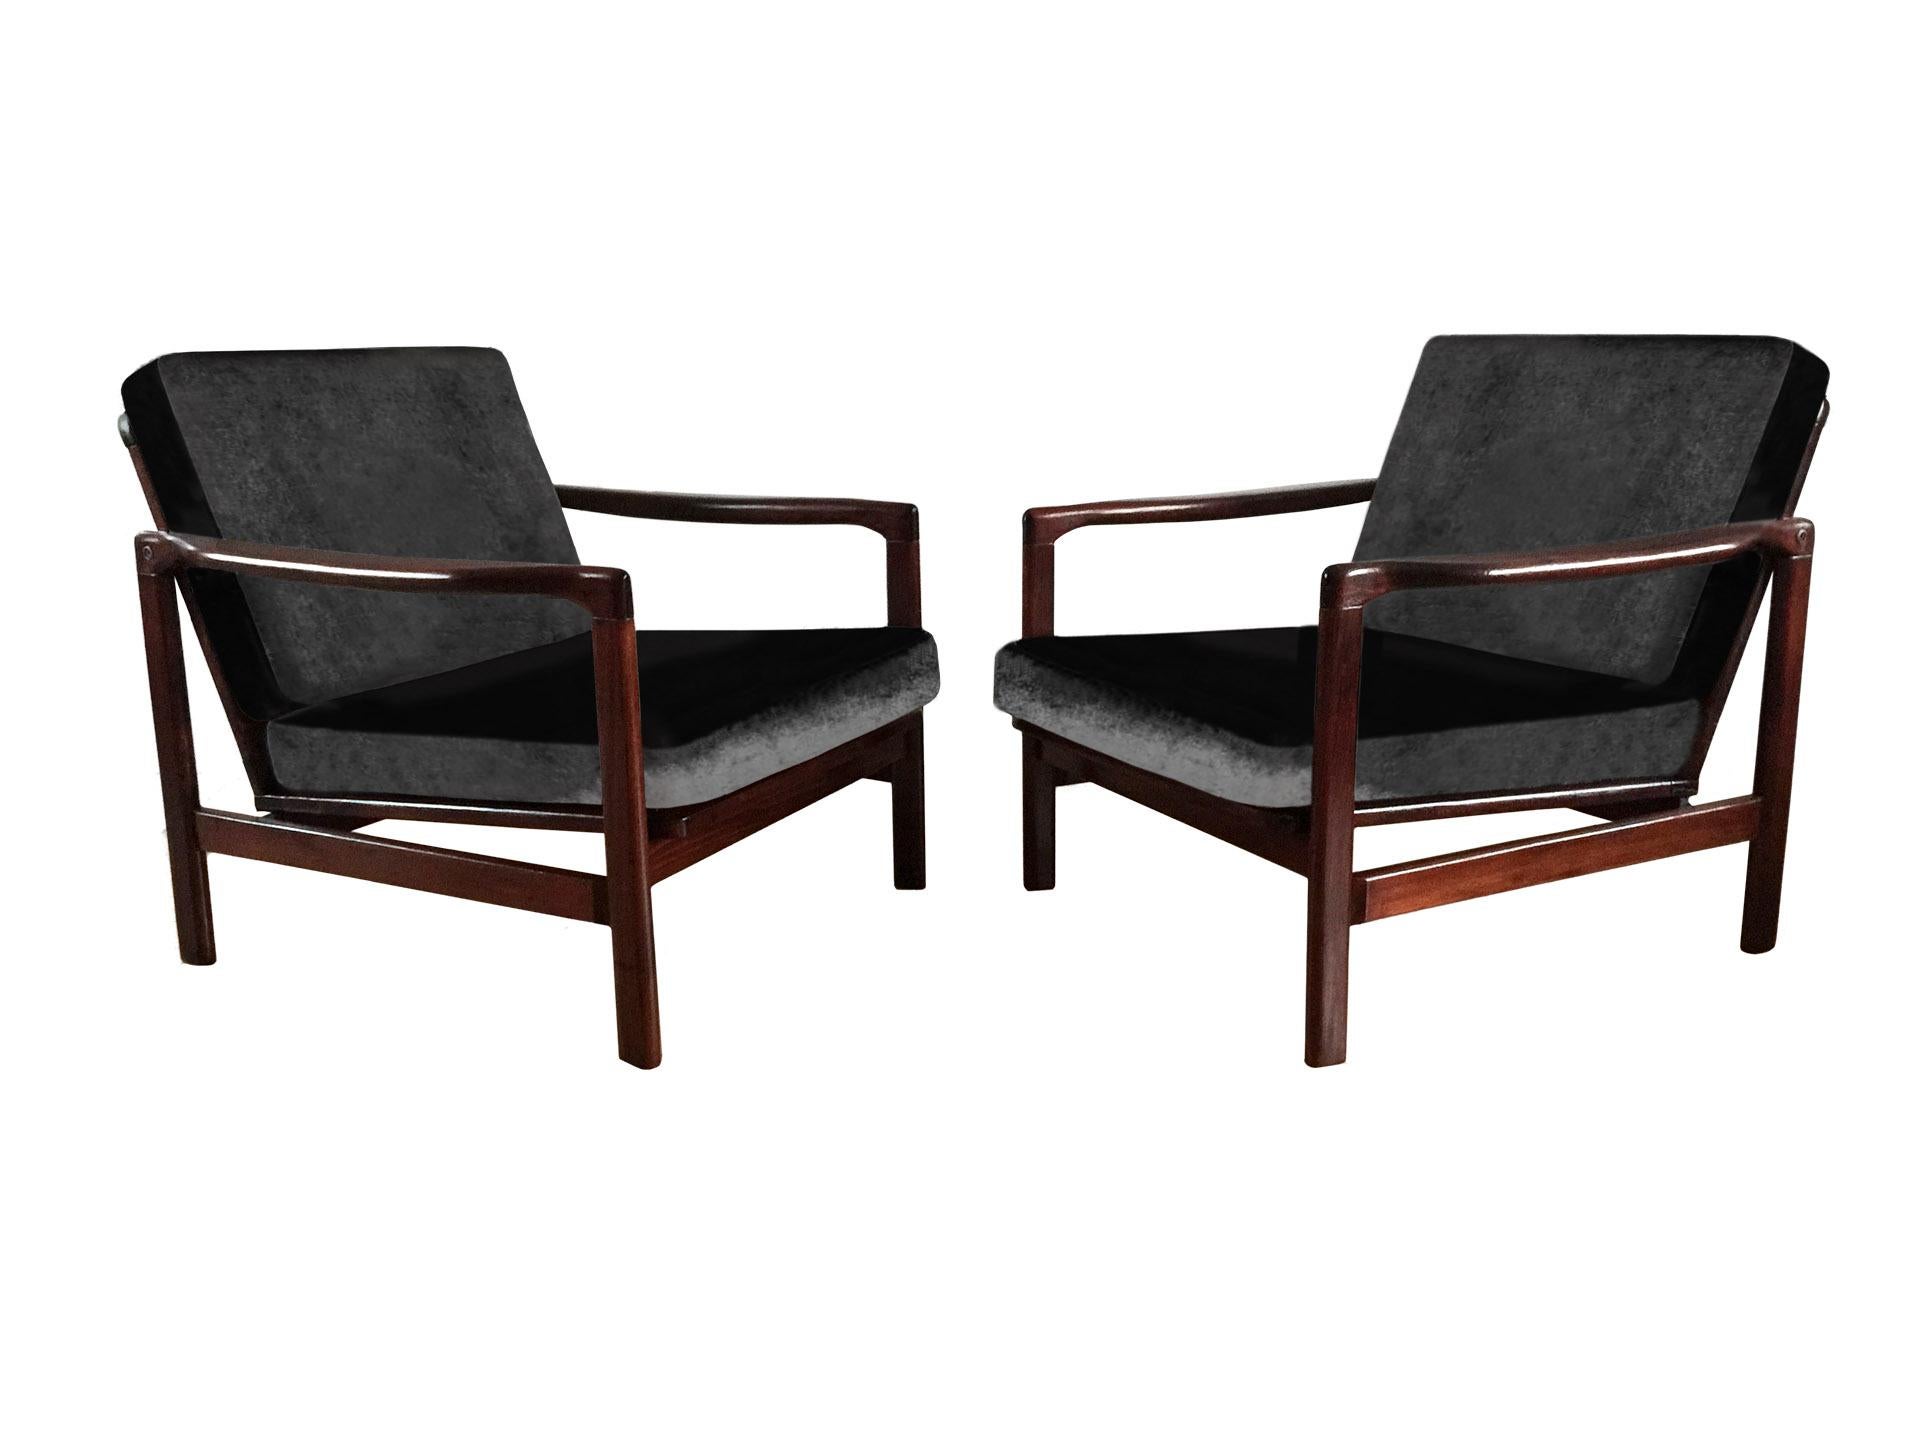 The set of two lounge chairs model B-7752, designed by Zenon Baczyk, has been manufactured by Swarzedzkie Fabryki Mebli in Poland in the 1960s. 
The structure is made of beech wood in a warm palisander color, finished with a high gloss varnish. The